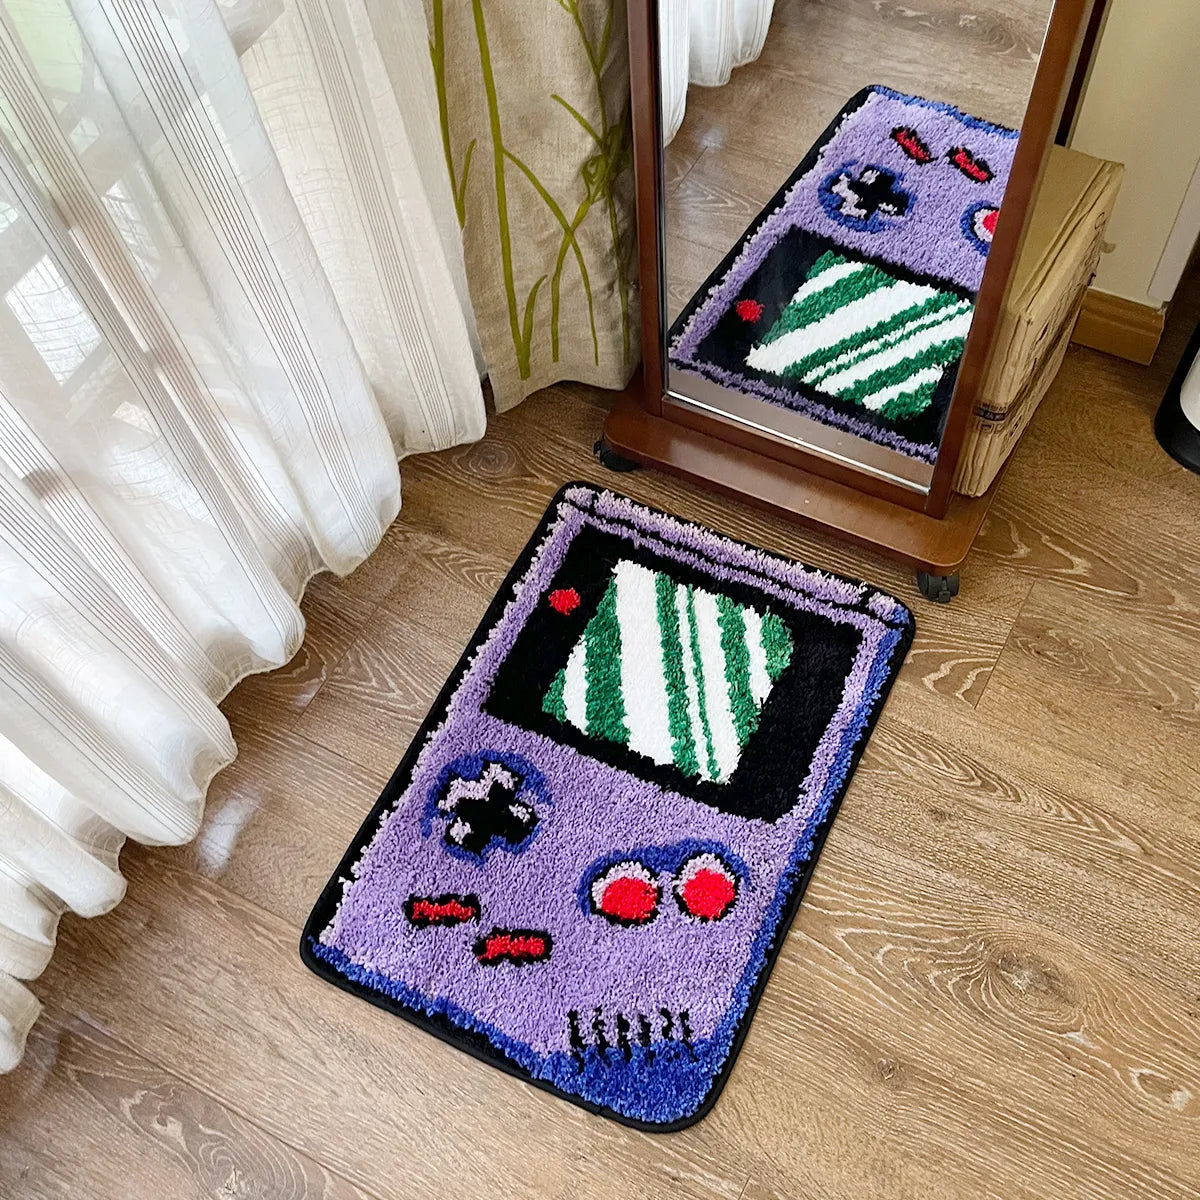 Portable Game Console Inspired Rug